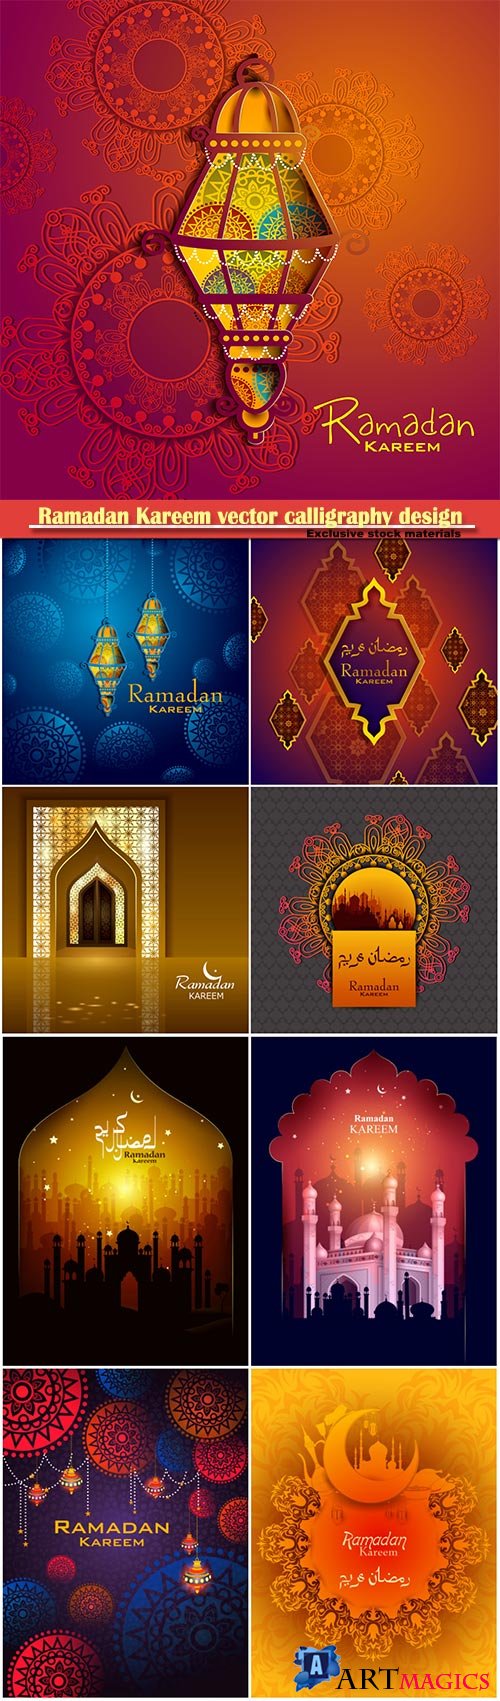 Ramadan Kareem vector calligraphy design with decorative floral pattern, mosque silhouette, crescent and glittering islamic background # 43